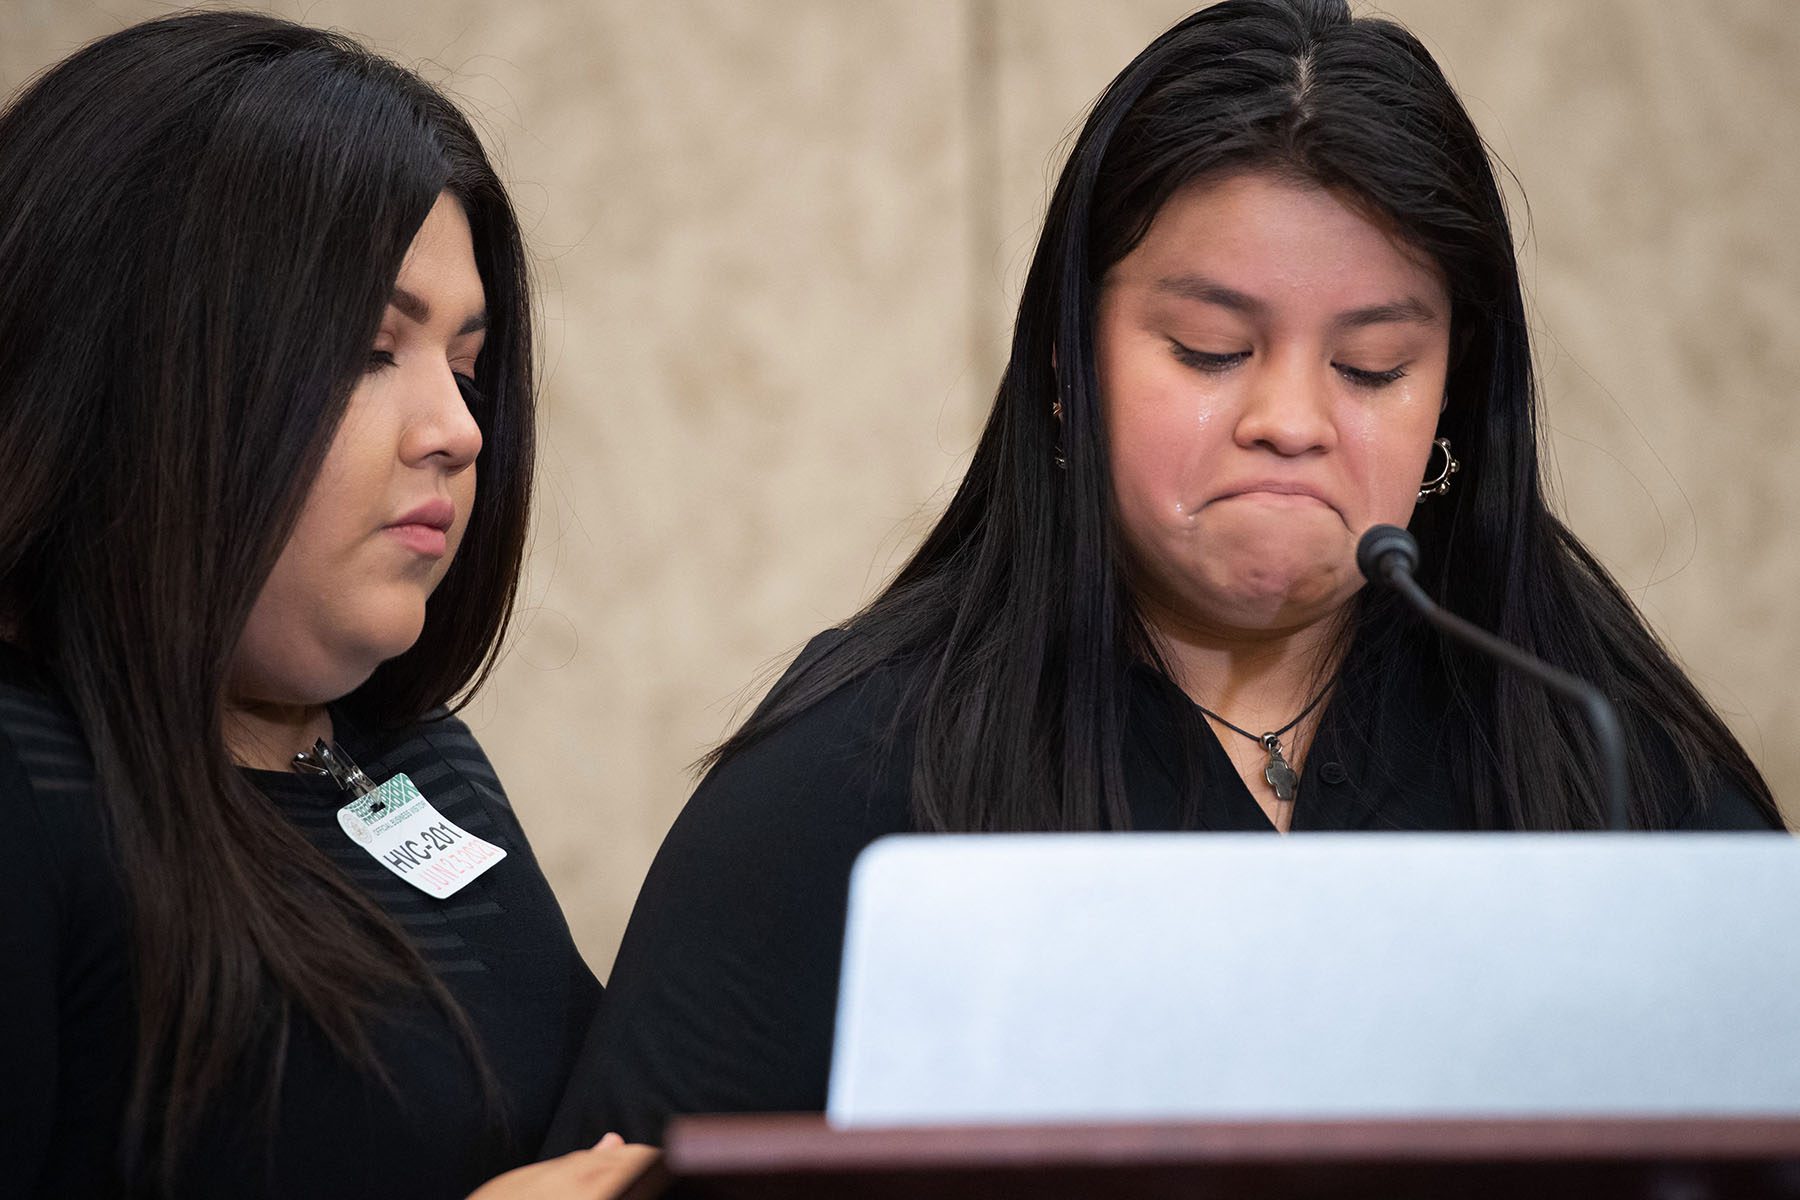 Mayra Guillen looks down at the podium as a tearful Lupe Guillen speaks into a microphone during a press conference.